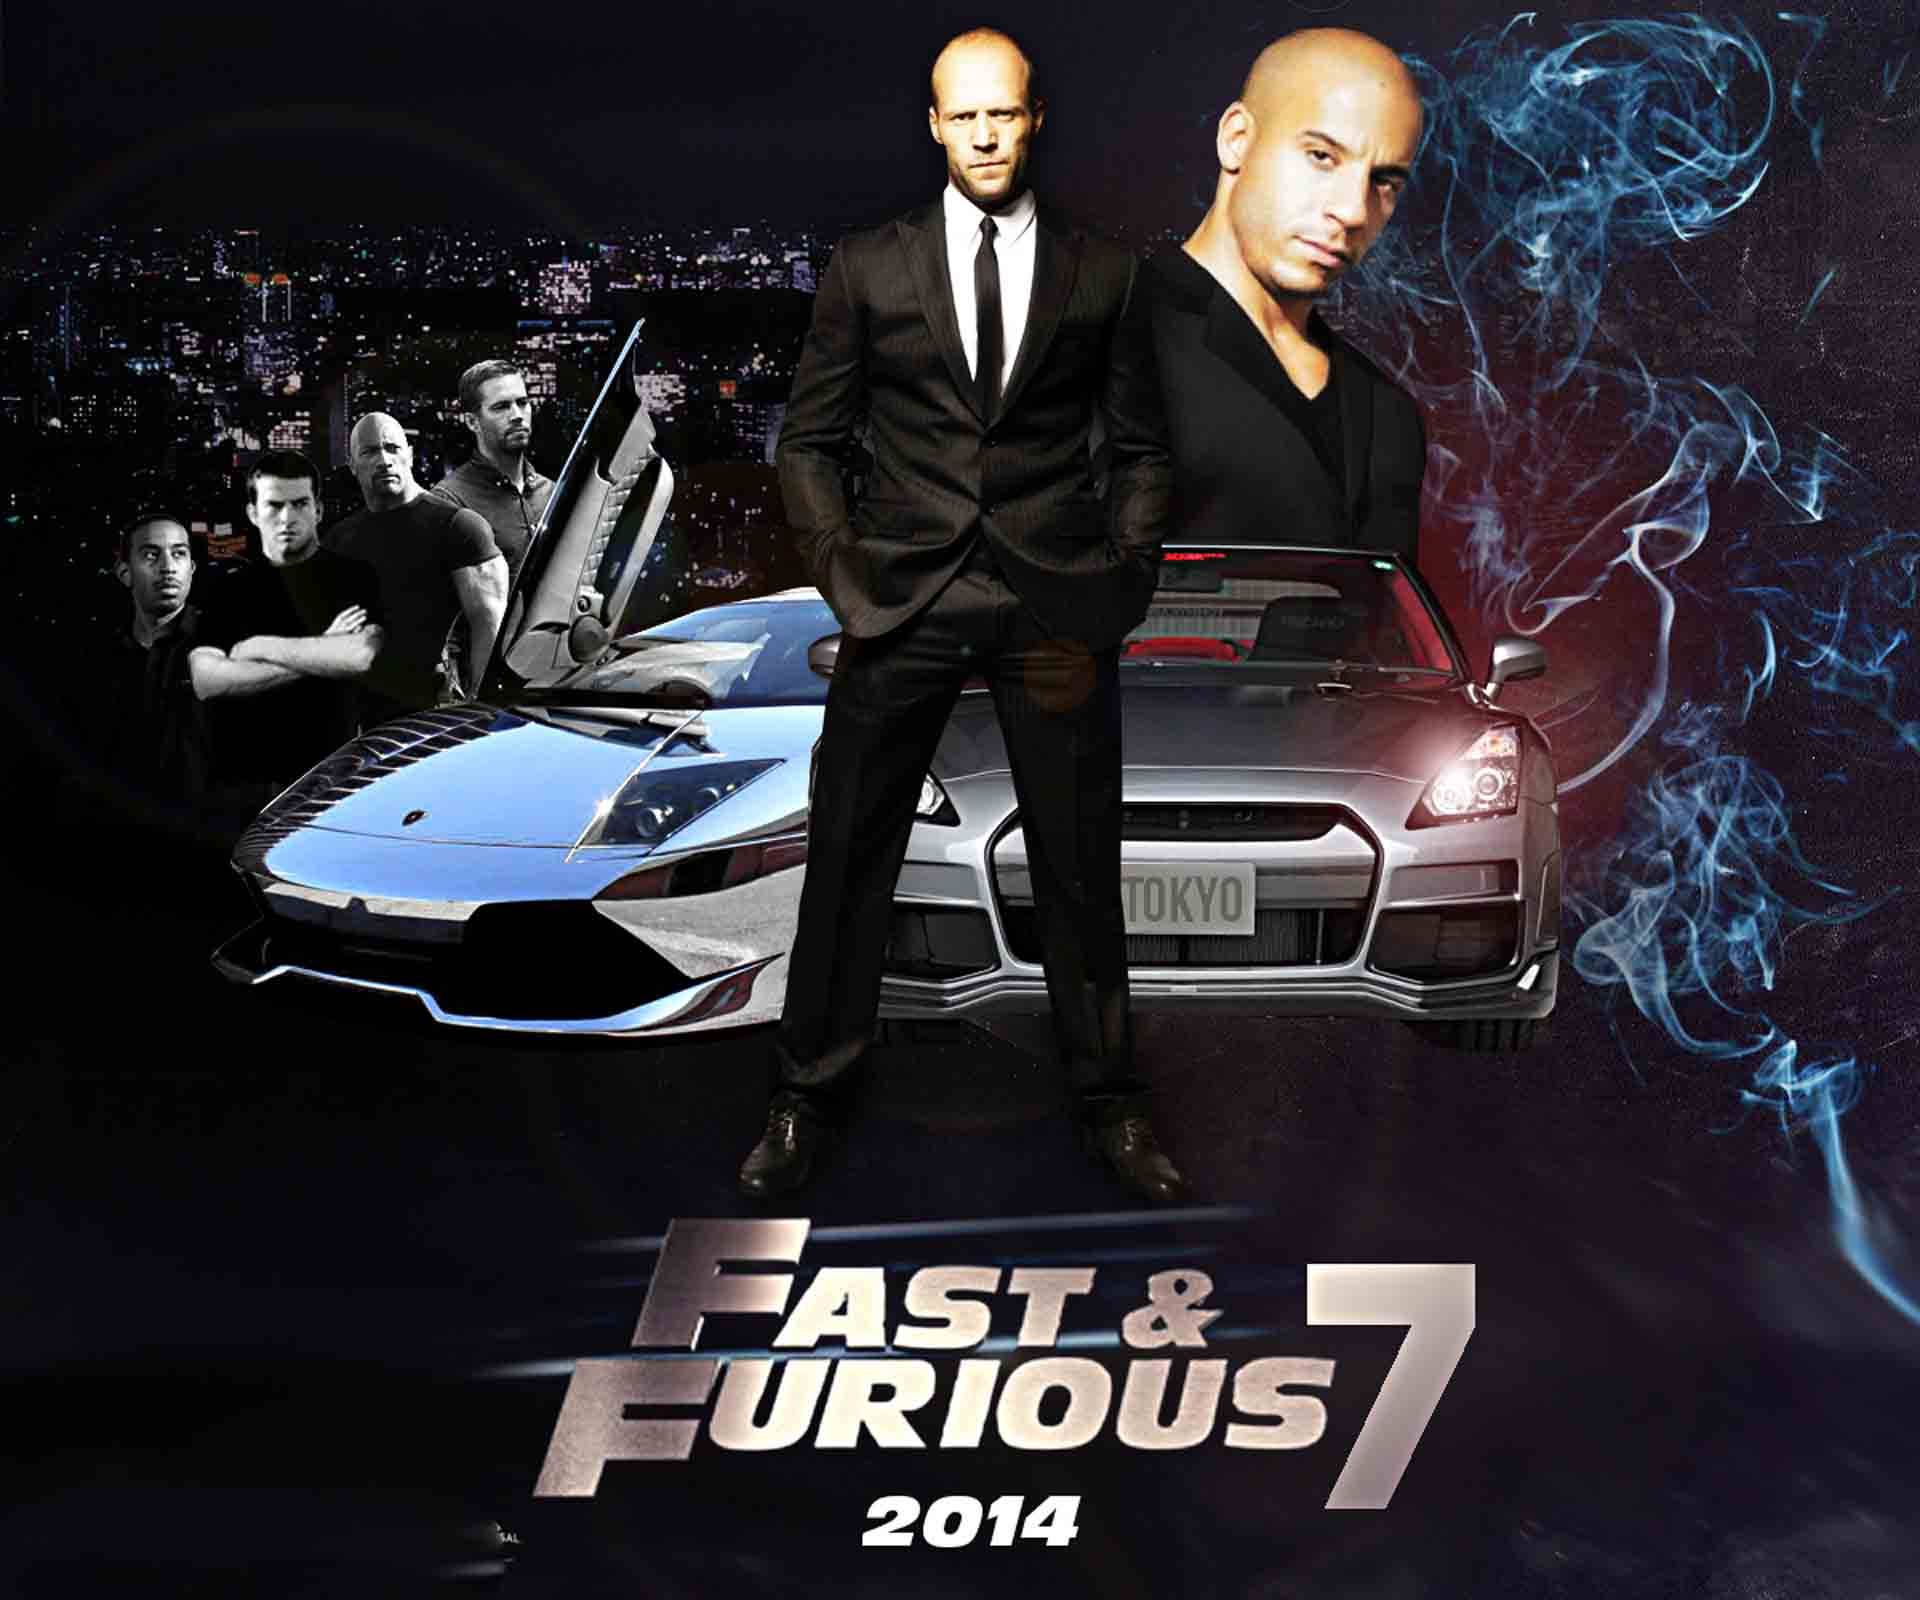 Fast And Furious Promotional Movie Poster